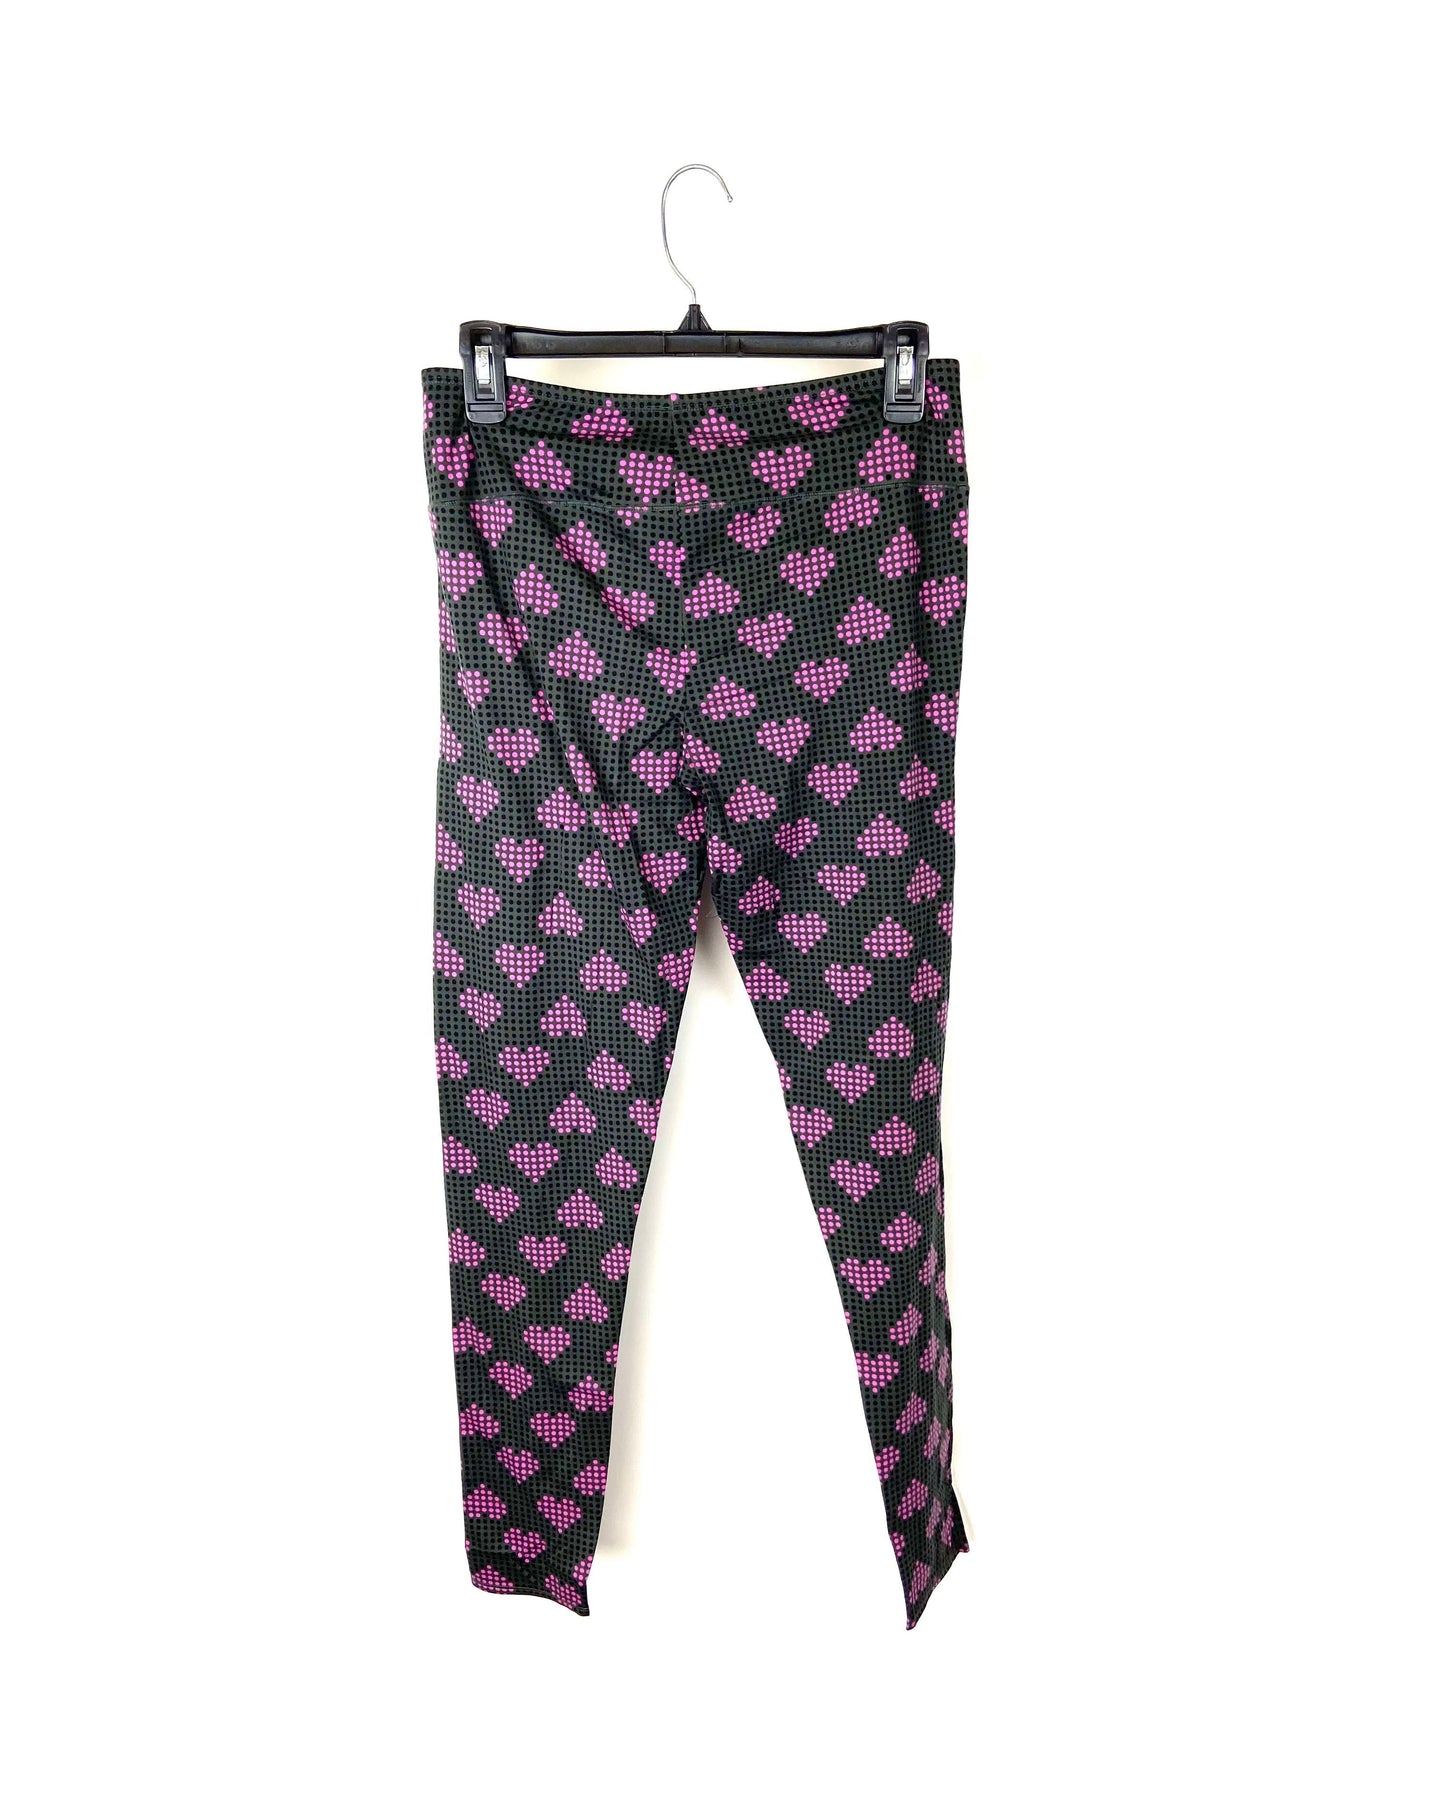 Climate Right By Cuddl Duds Grey And Pink Heart Leggings - Medium